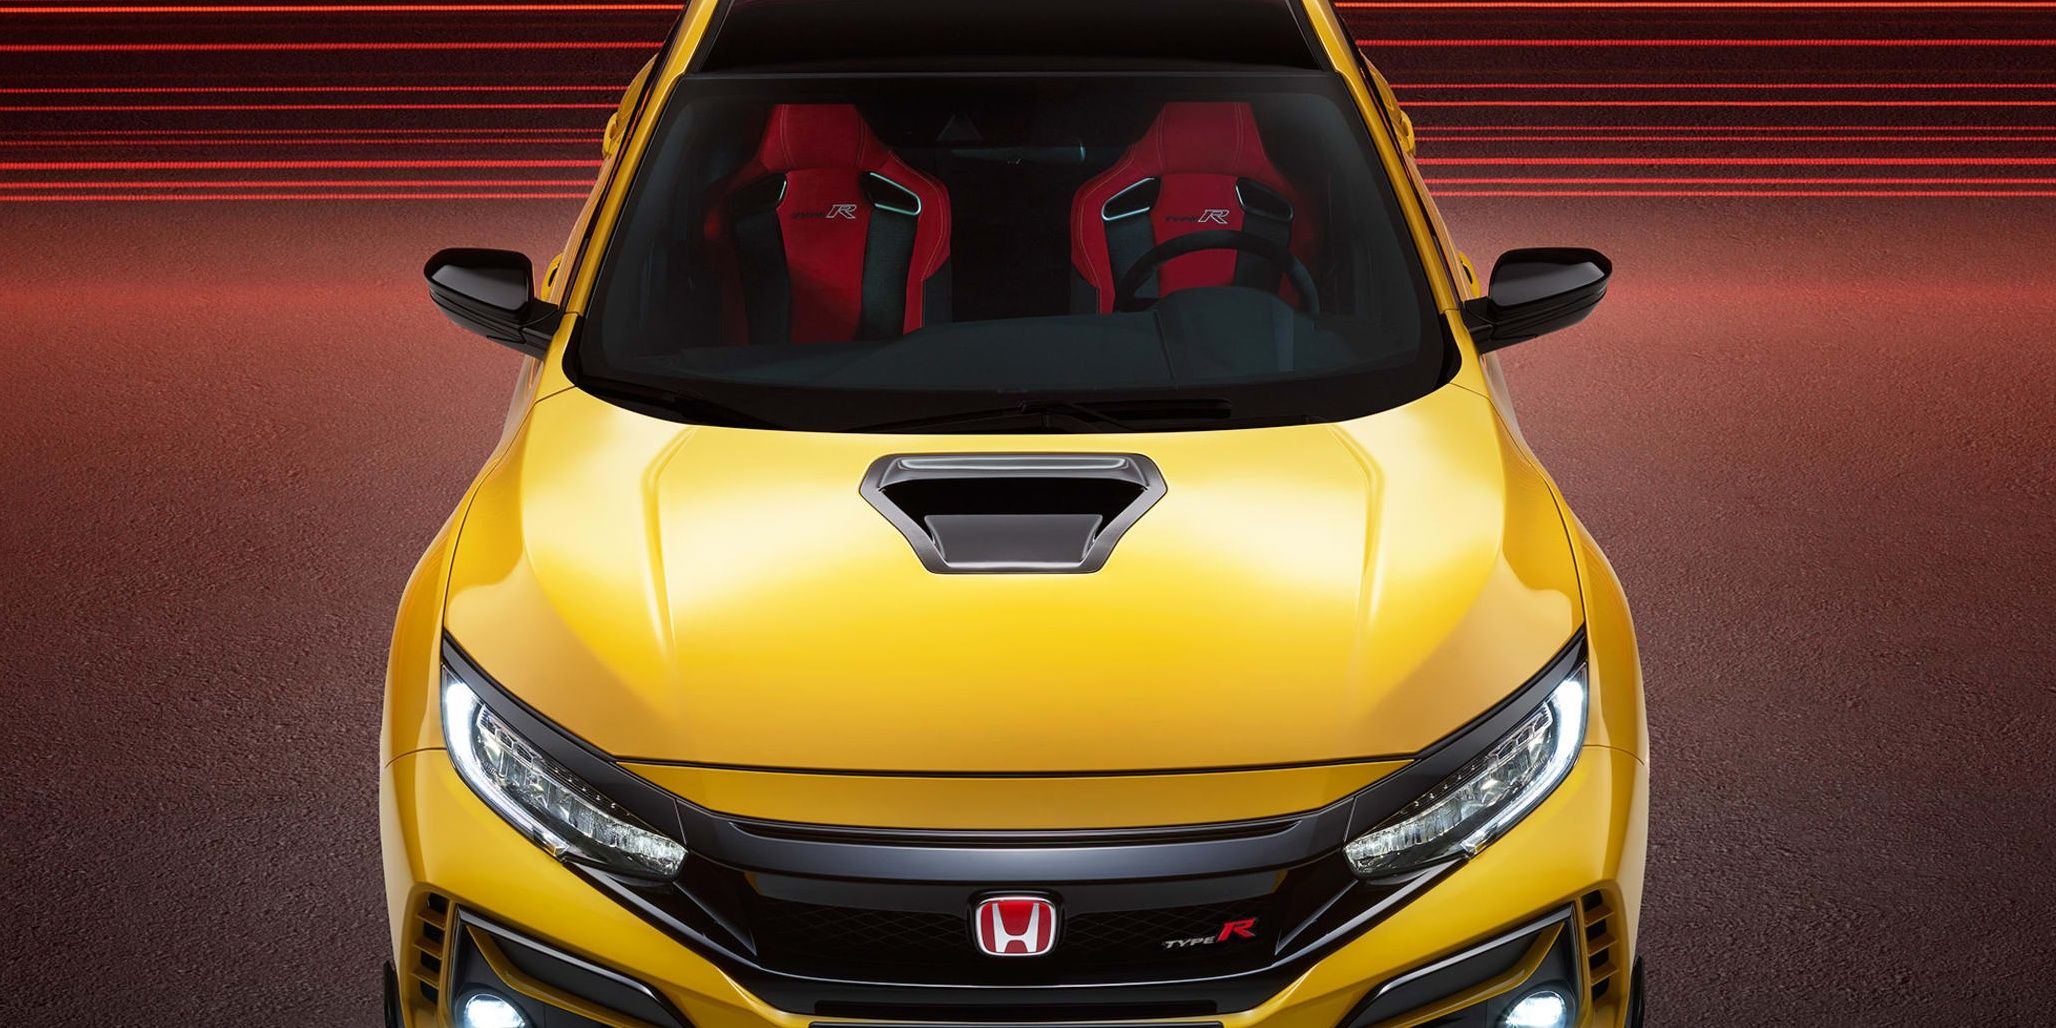 Honda Civic Type R Front View